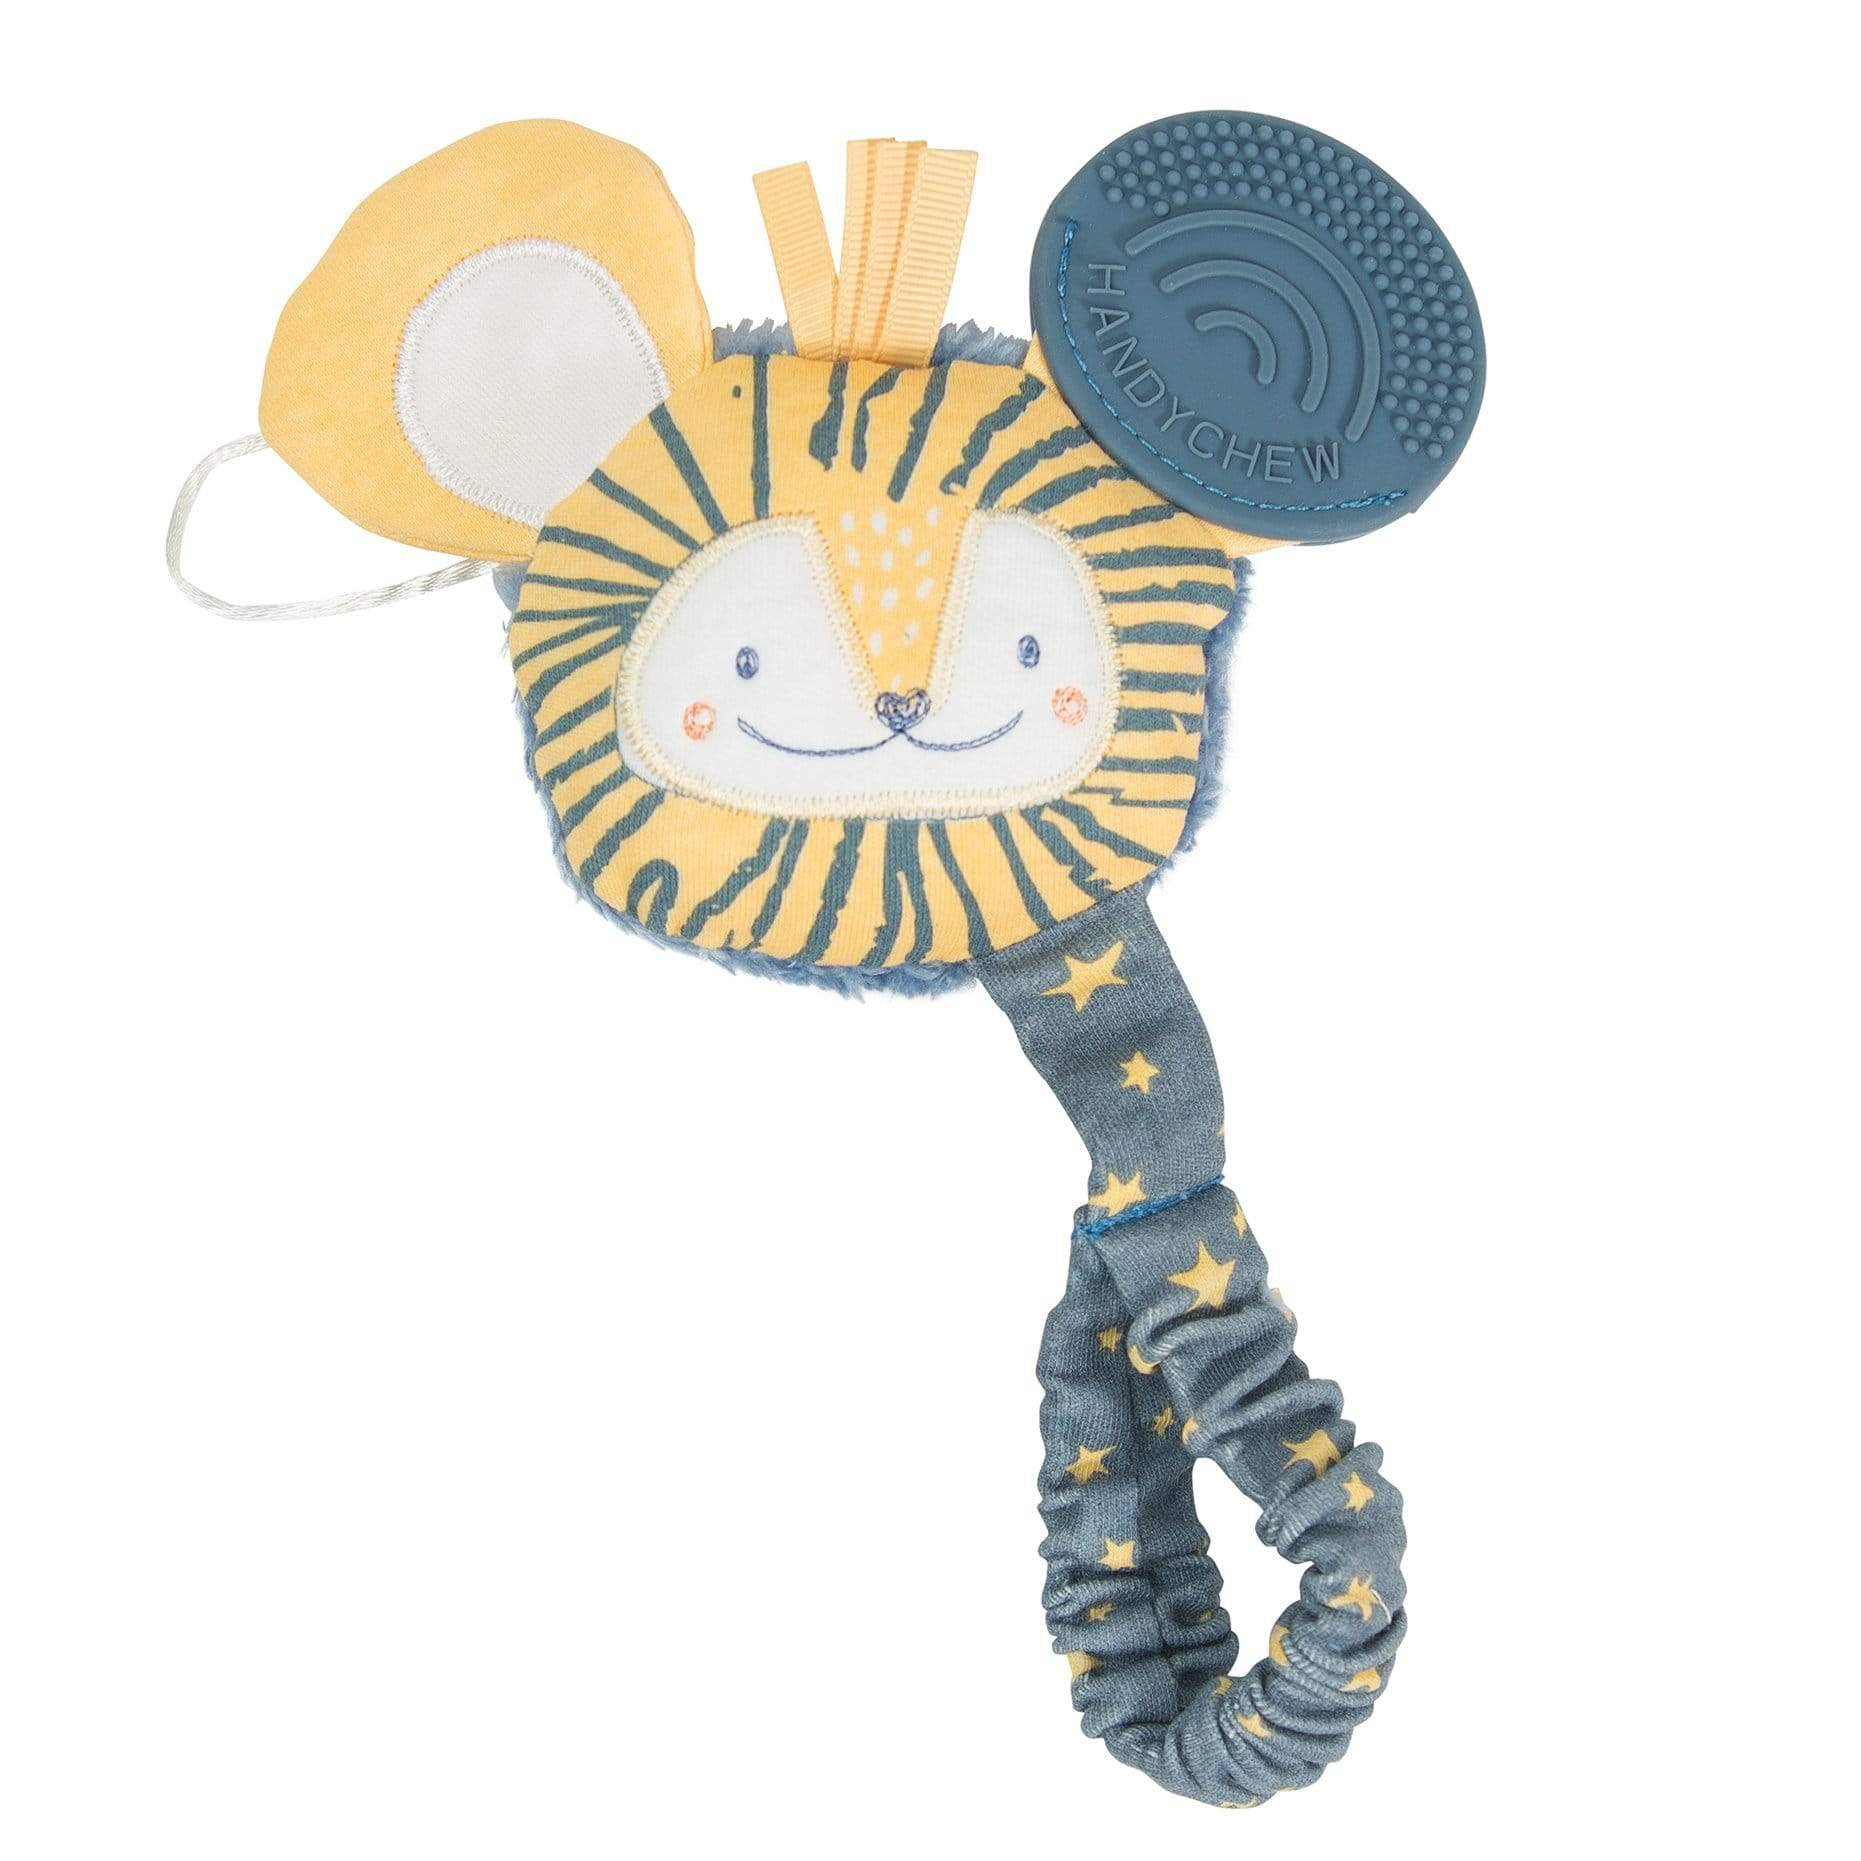 Yellow and blue teething toy with a lion face and stars